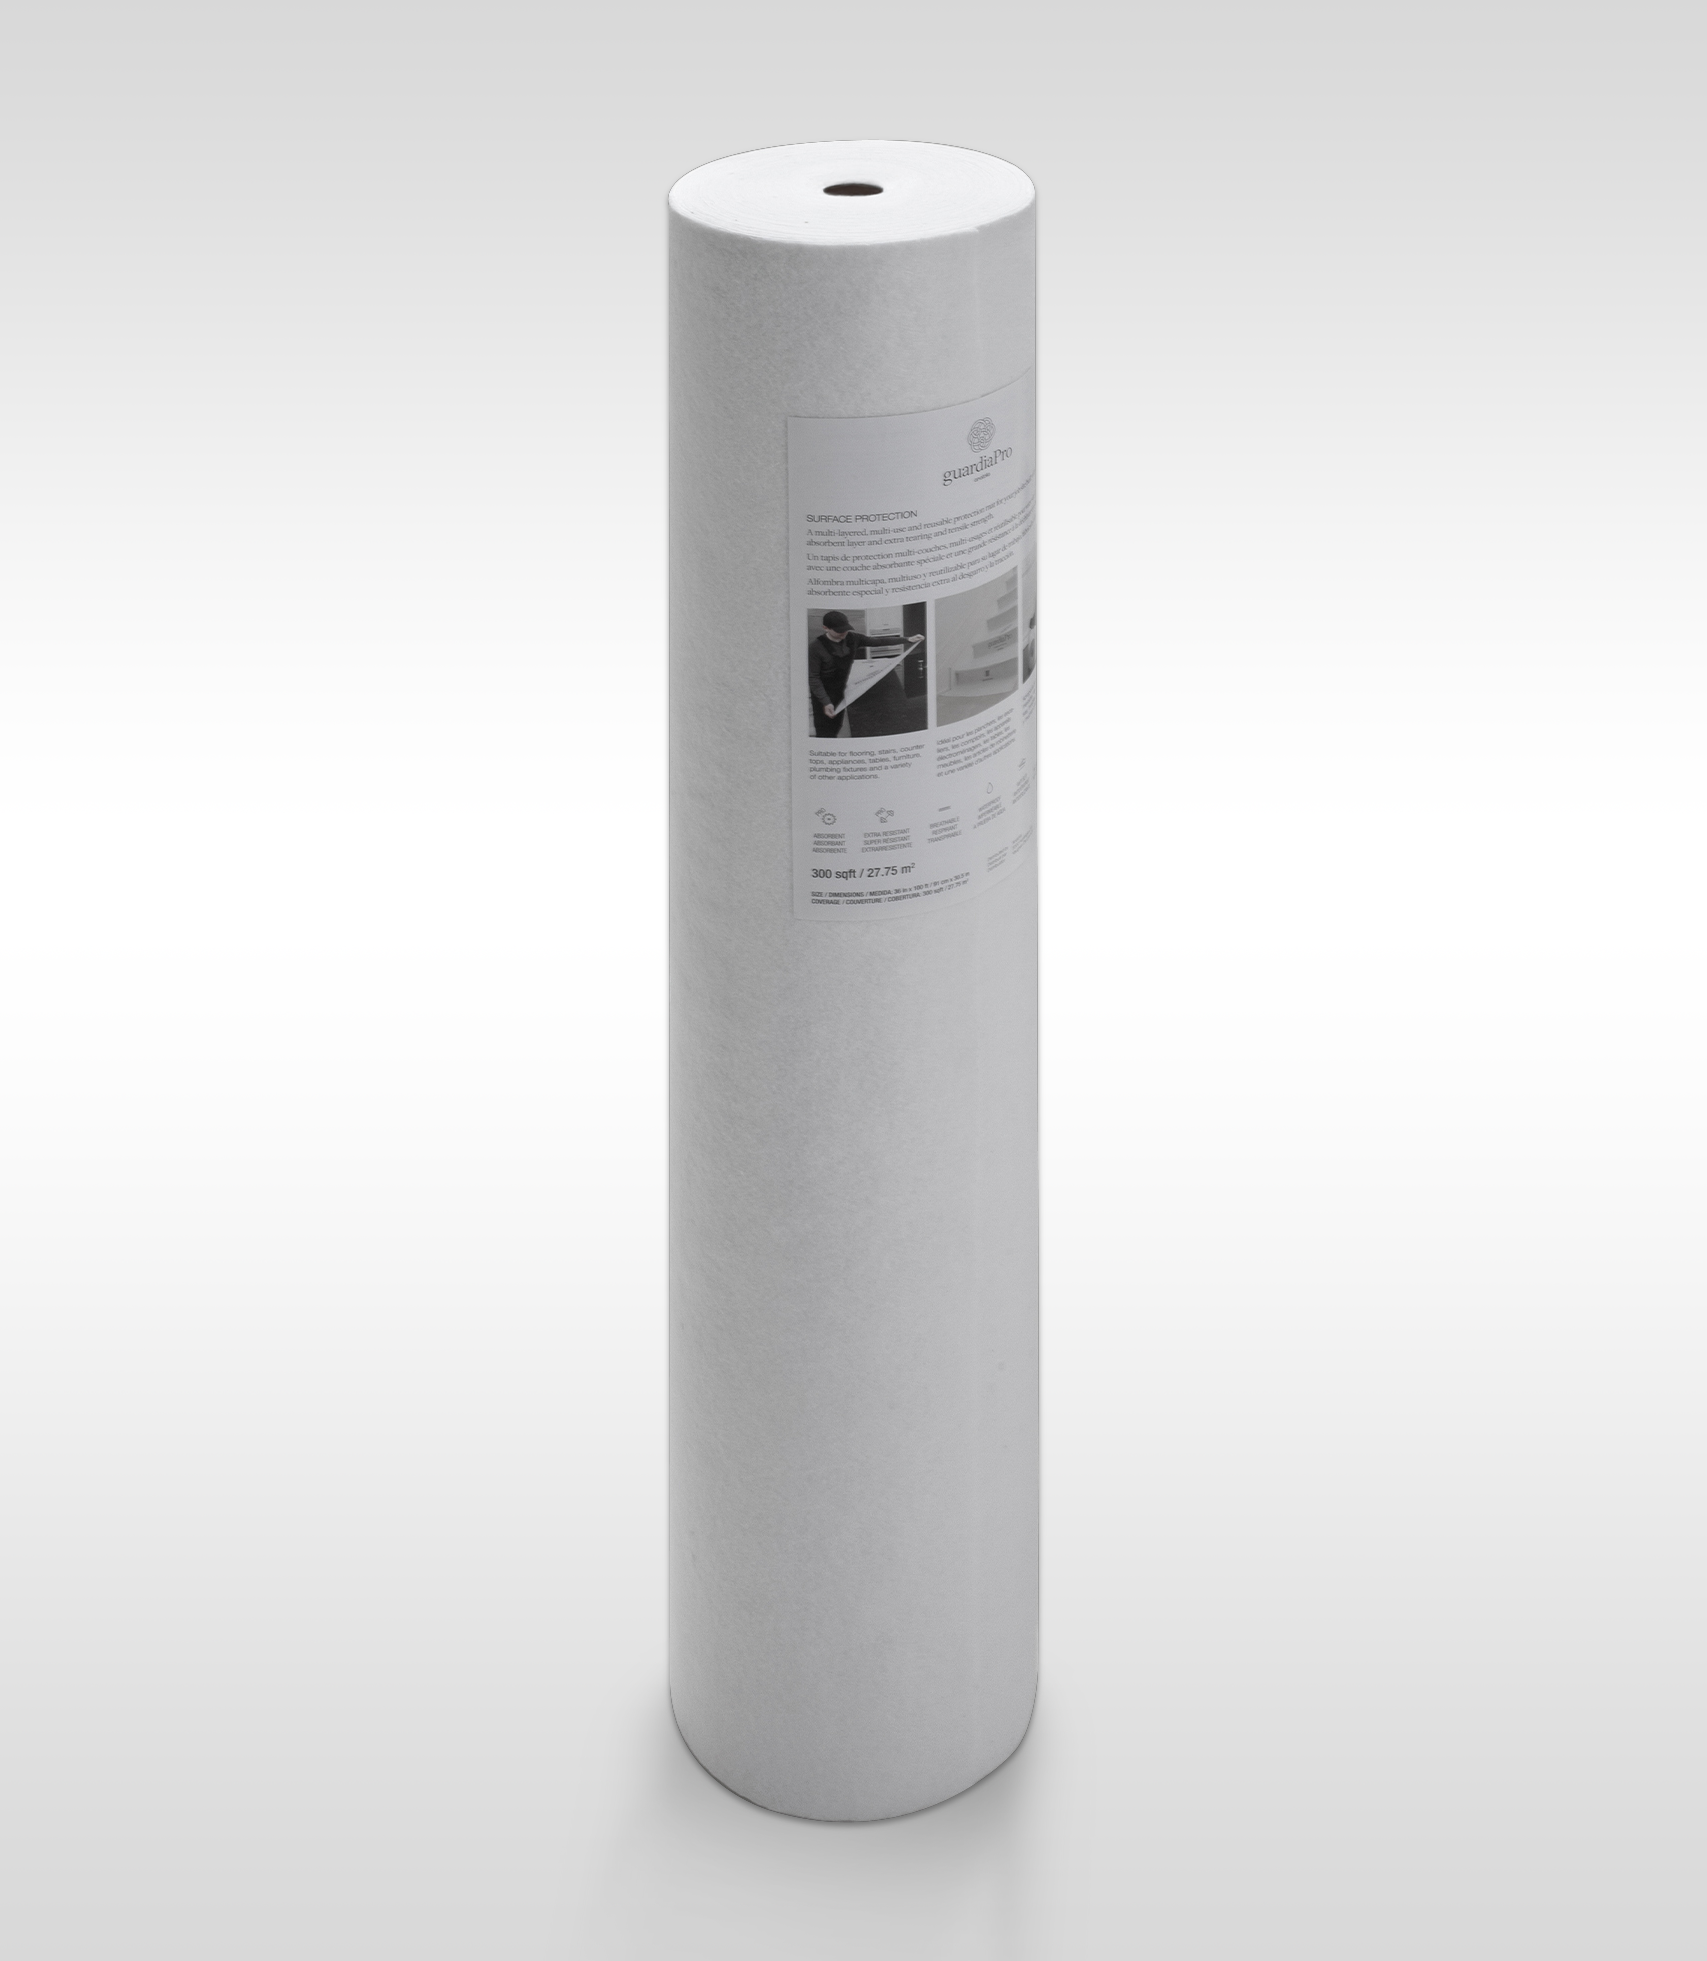 Guardia Pro Surface protection multi layered White Rolls - 300 SQFT